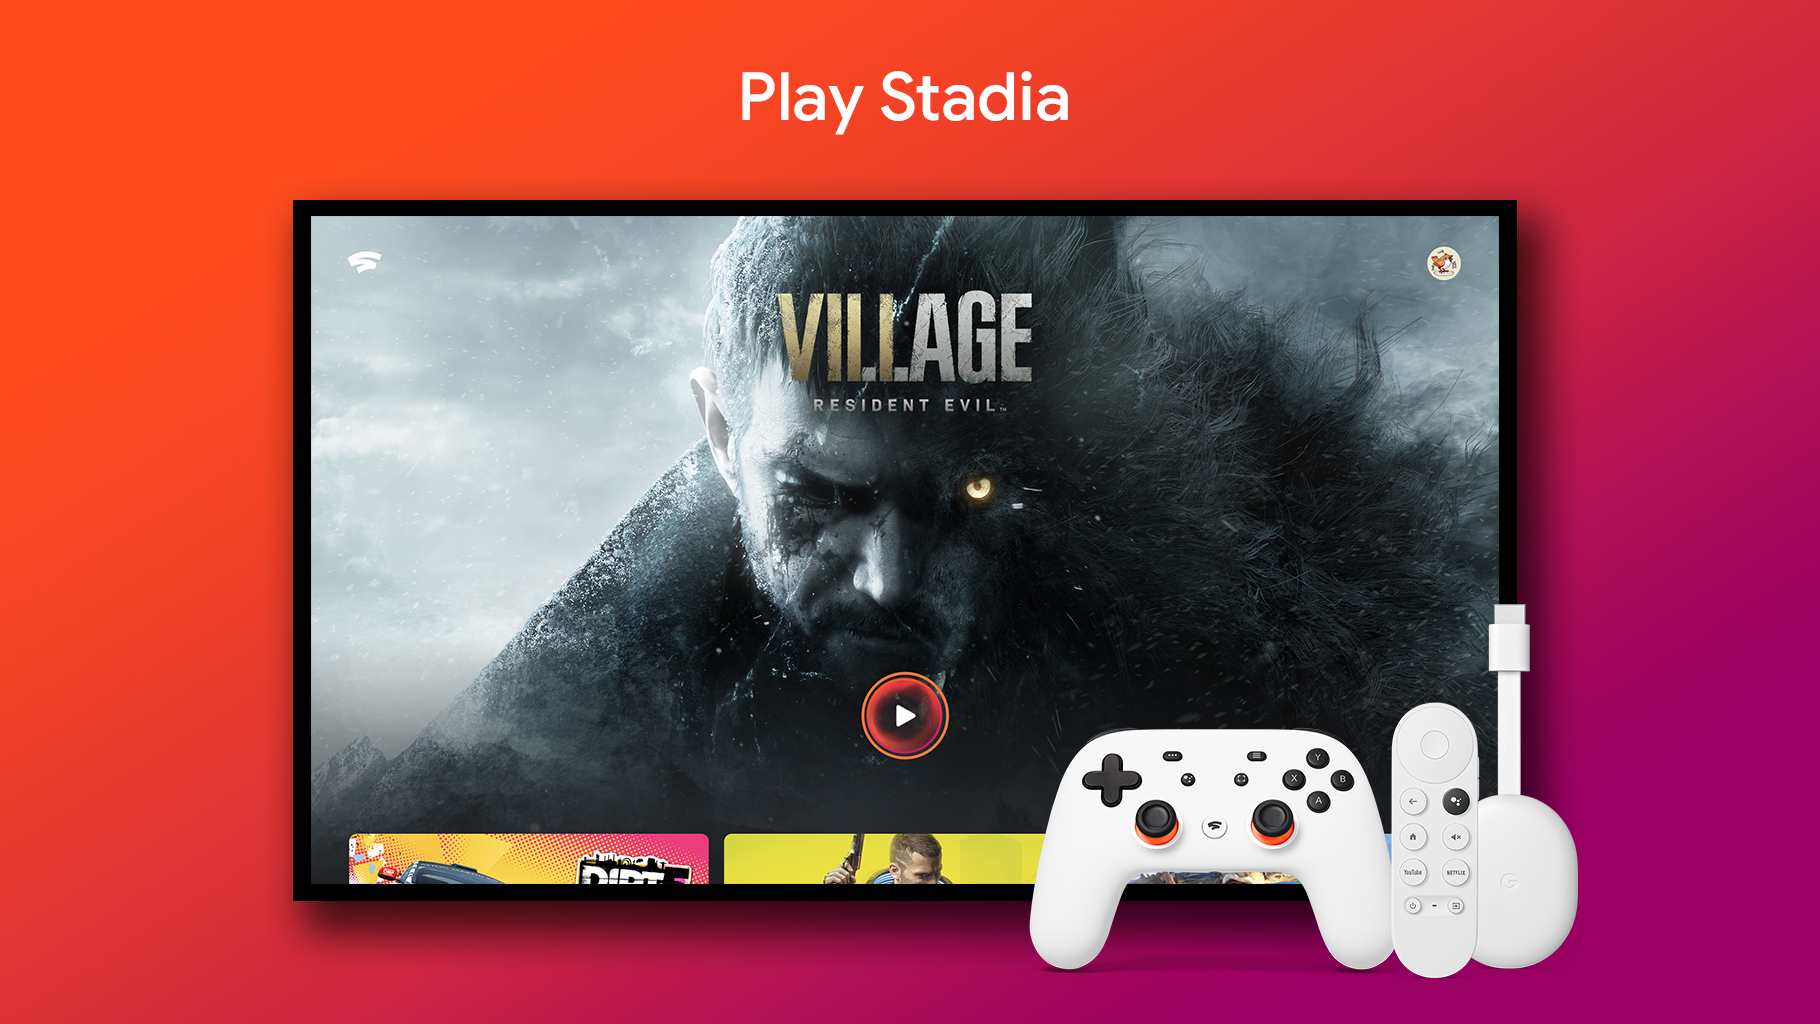 Stadia website for new users redesigned with games list - 9to5Google